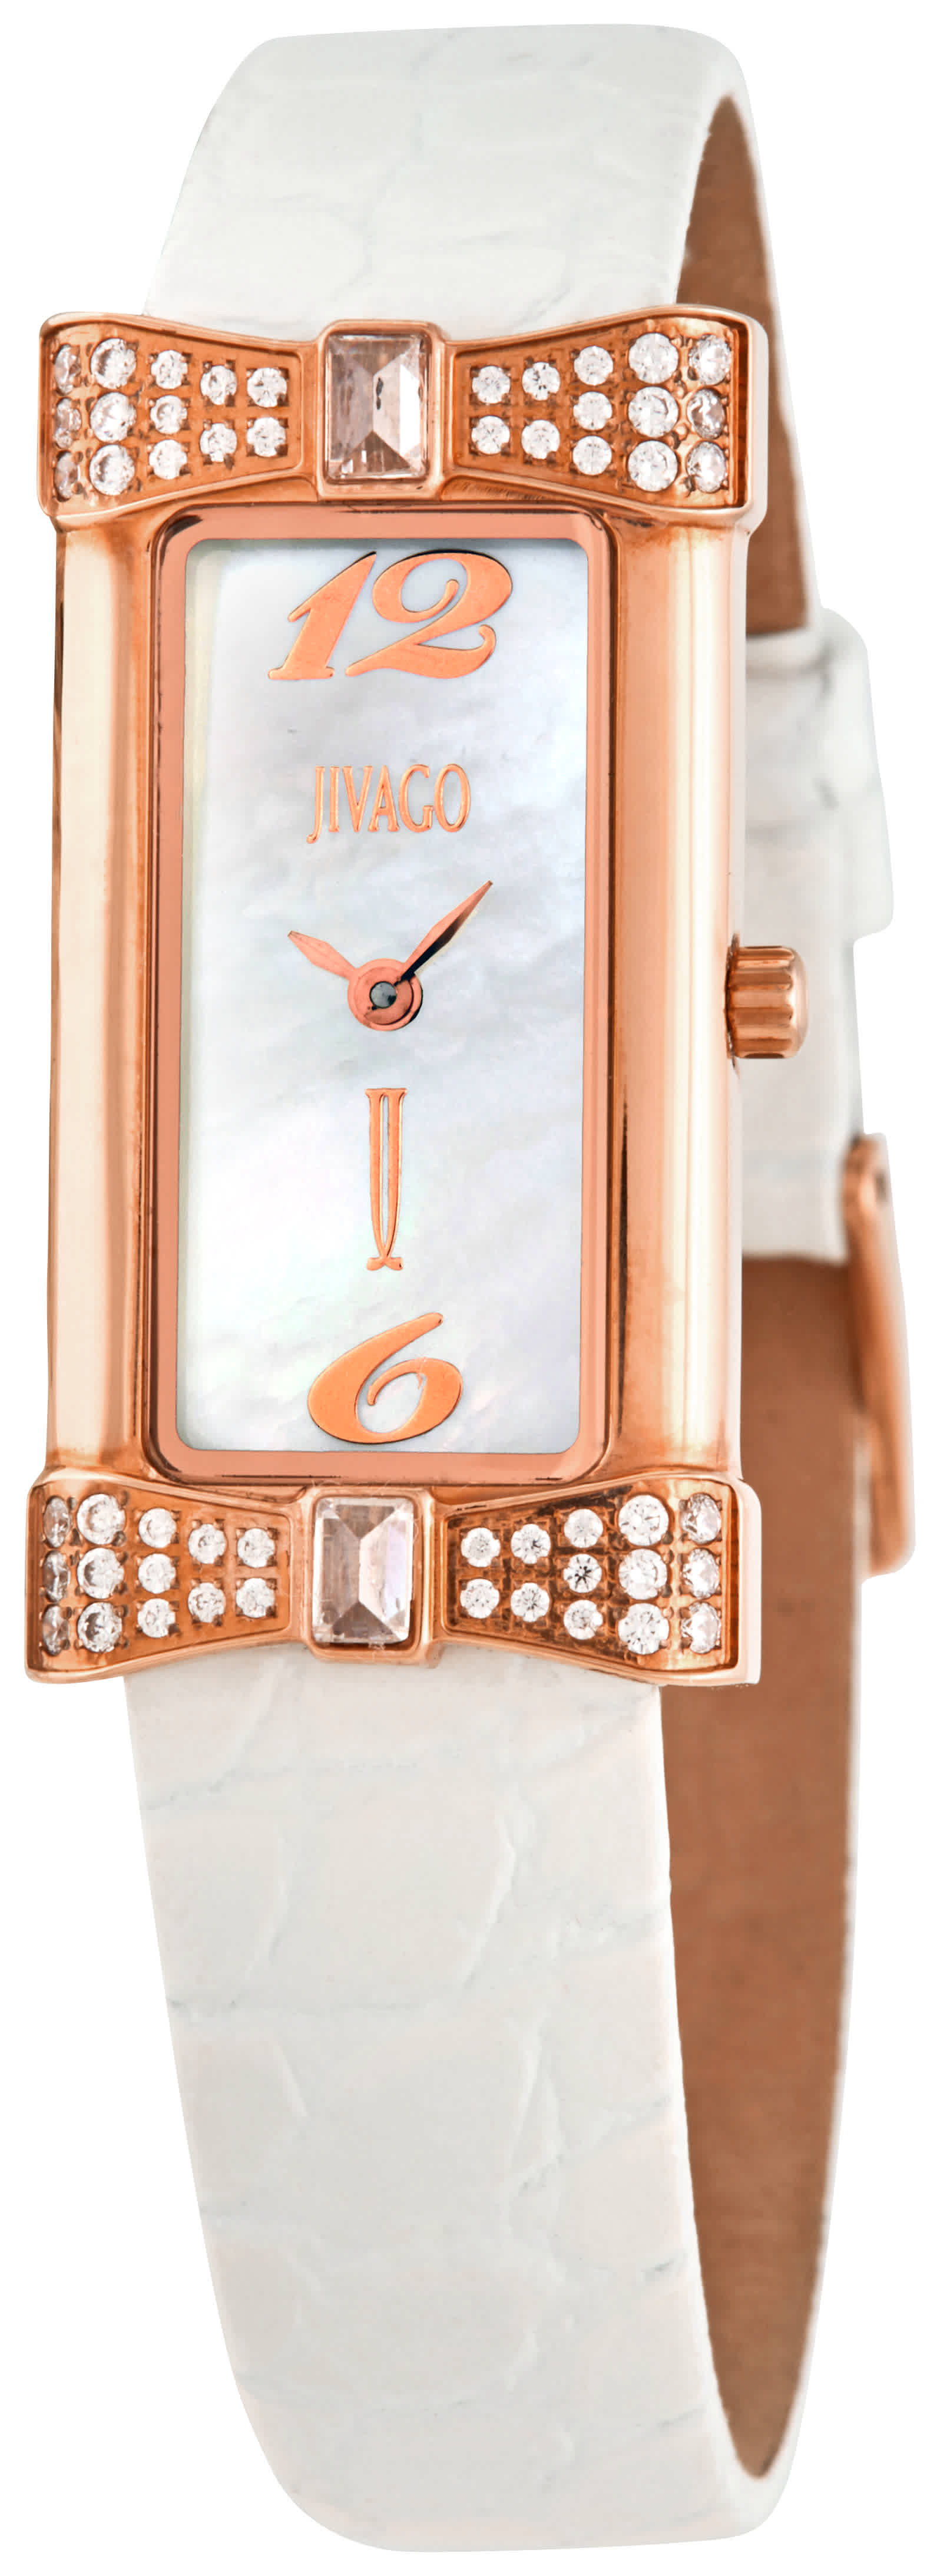 Jivago Charmante White Mother Of Pearl Dial Ladies Watch Jv1412 In Gold Tone / Mother Of Pearl / Rose / Rose Gold Tone / White